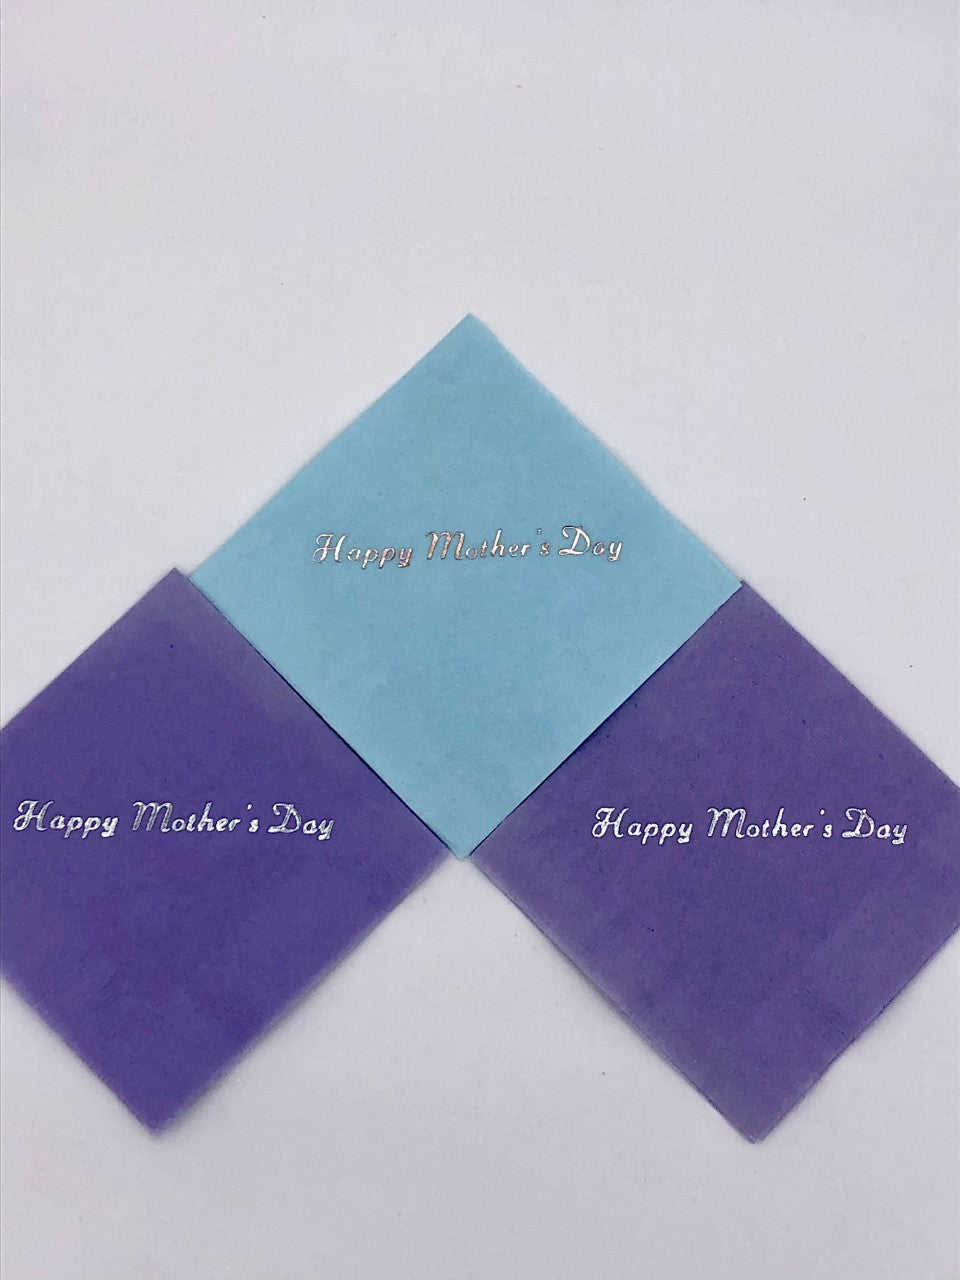 Purple and light blue cocktail napkins with silver Happy Mother's Day slogan